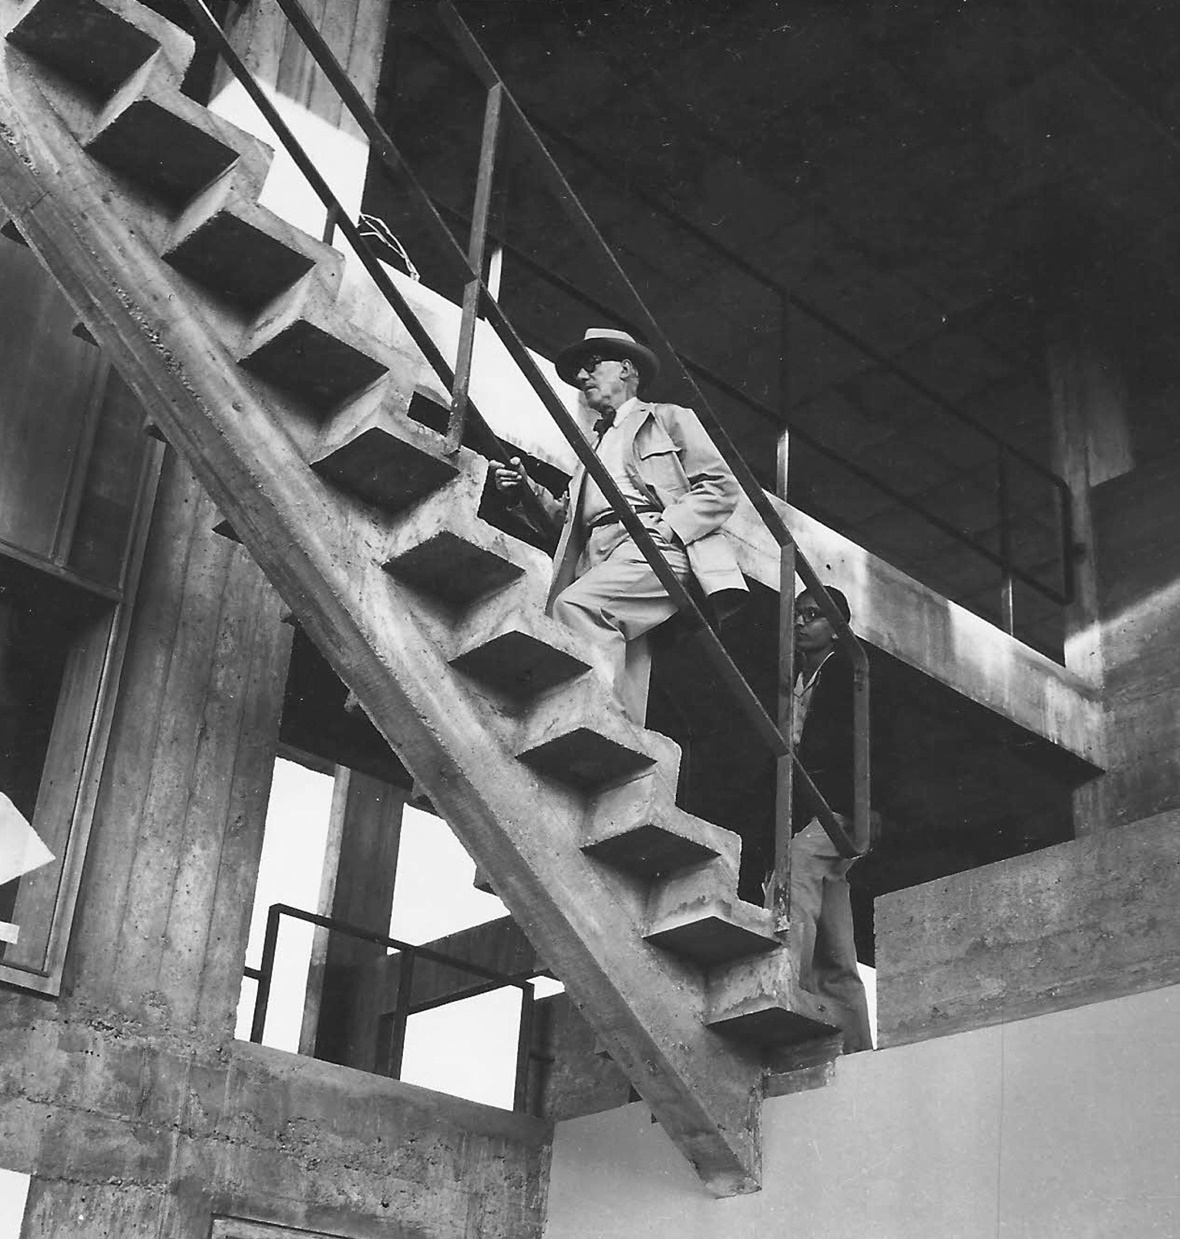 Le Corbusier and Doshi visiting a recently finished project